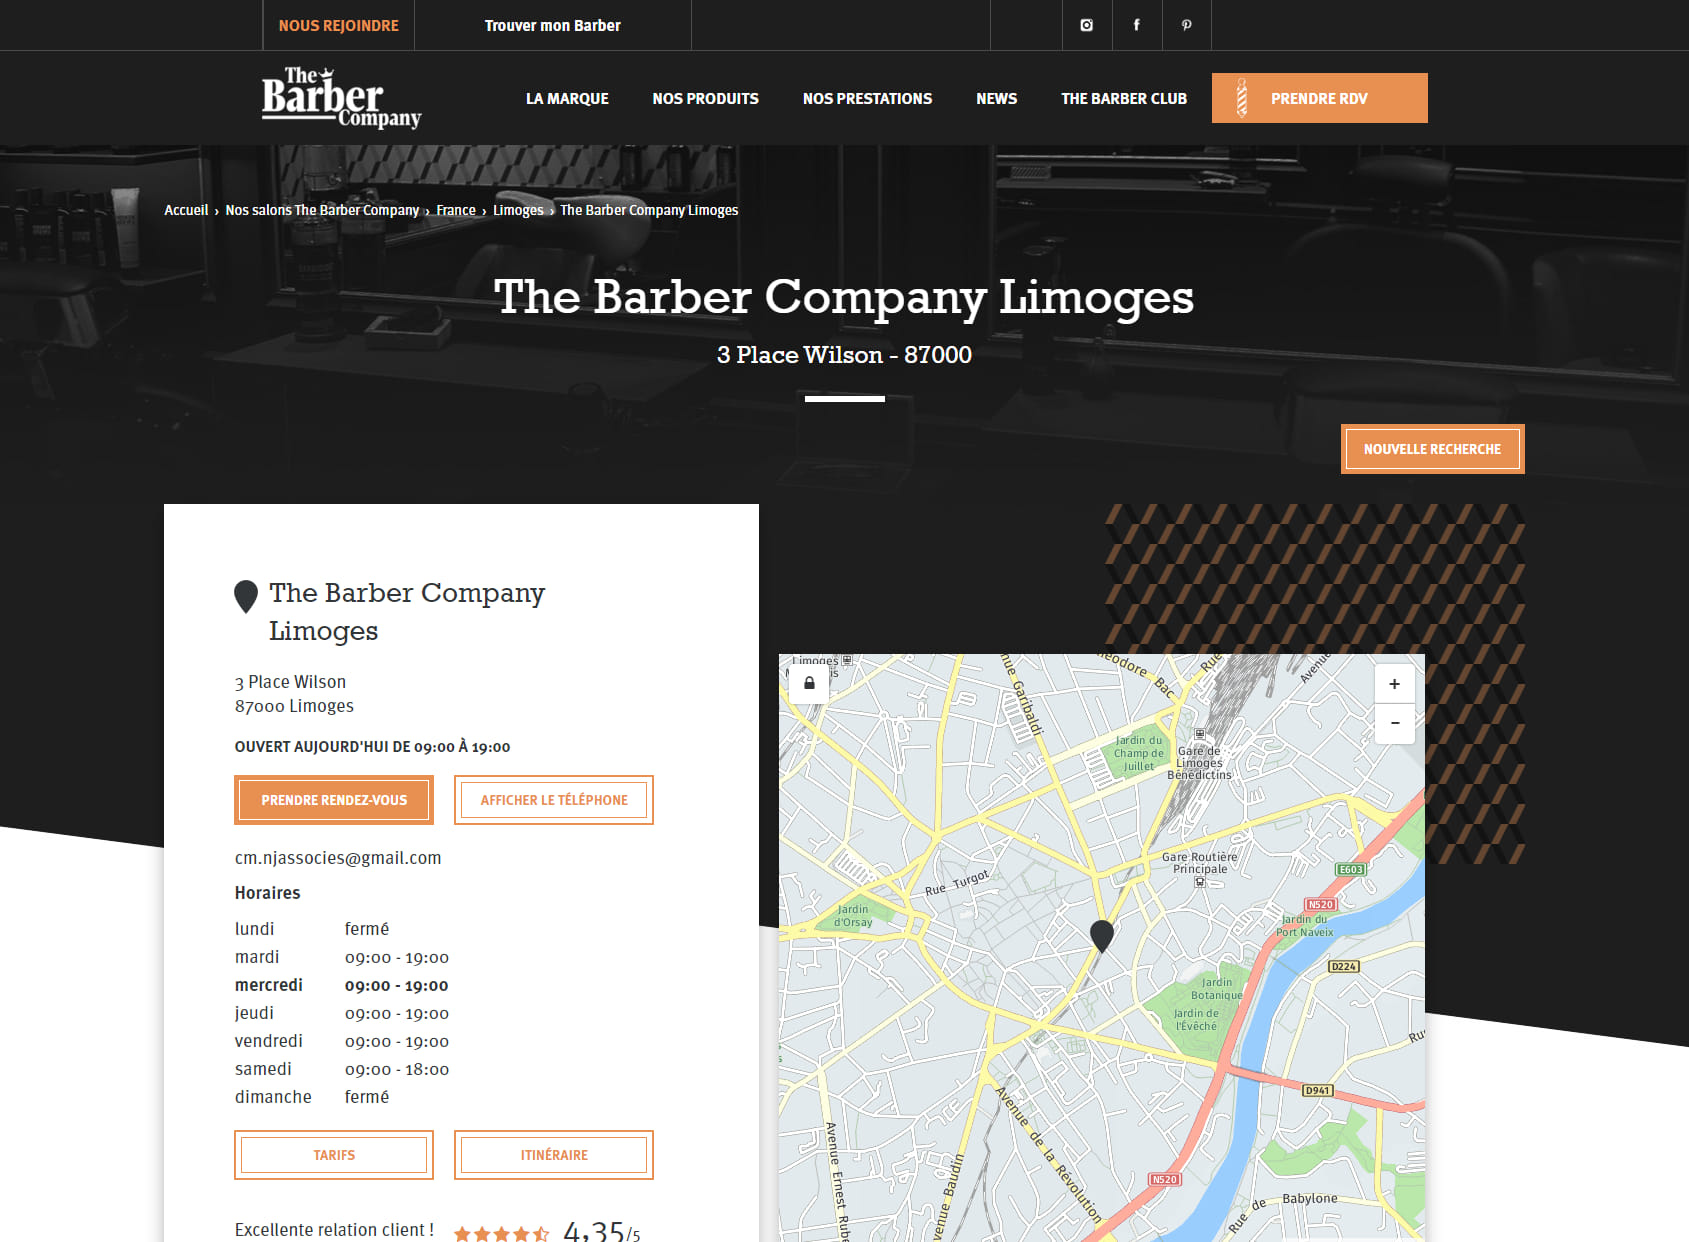 The Barber Company - Coiffeur Barbier Limoges